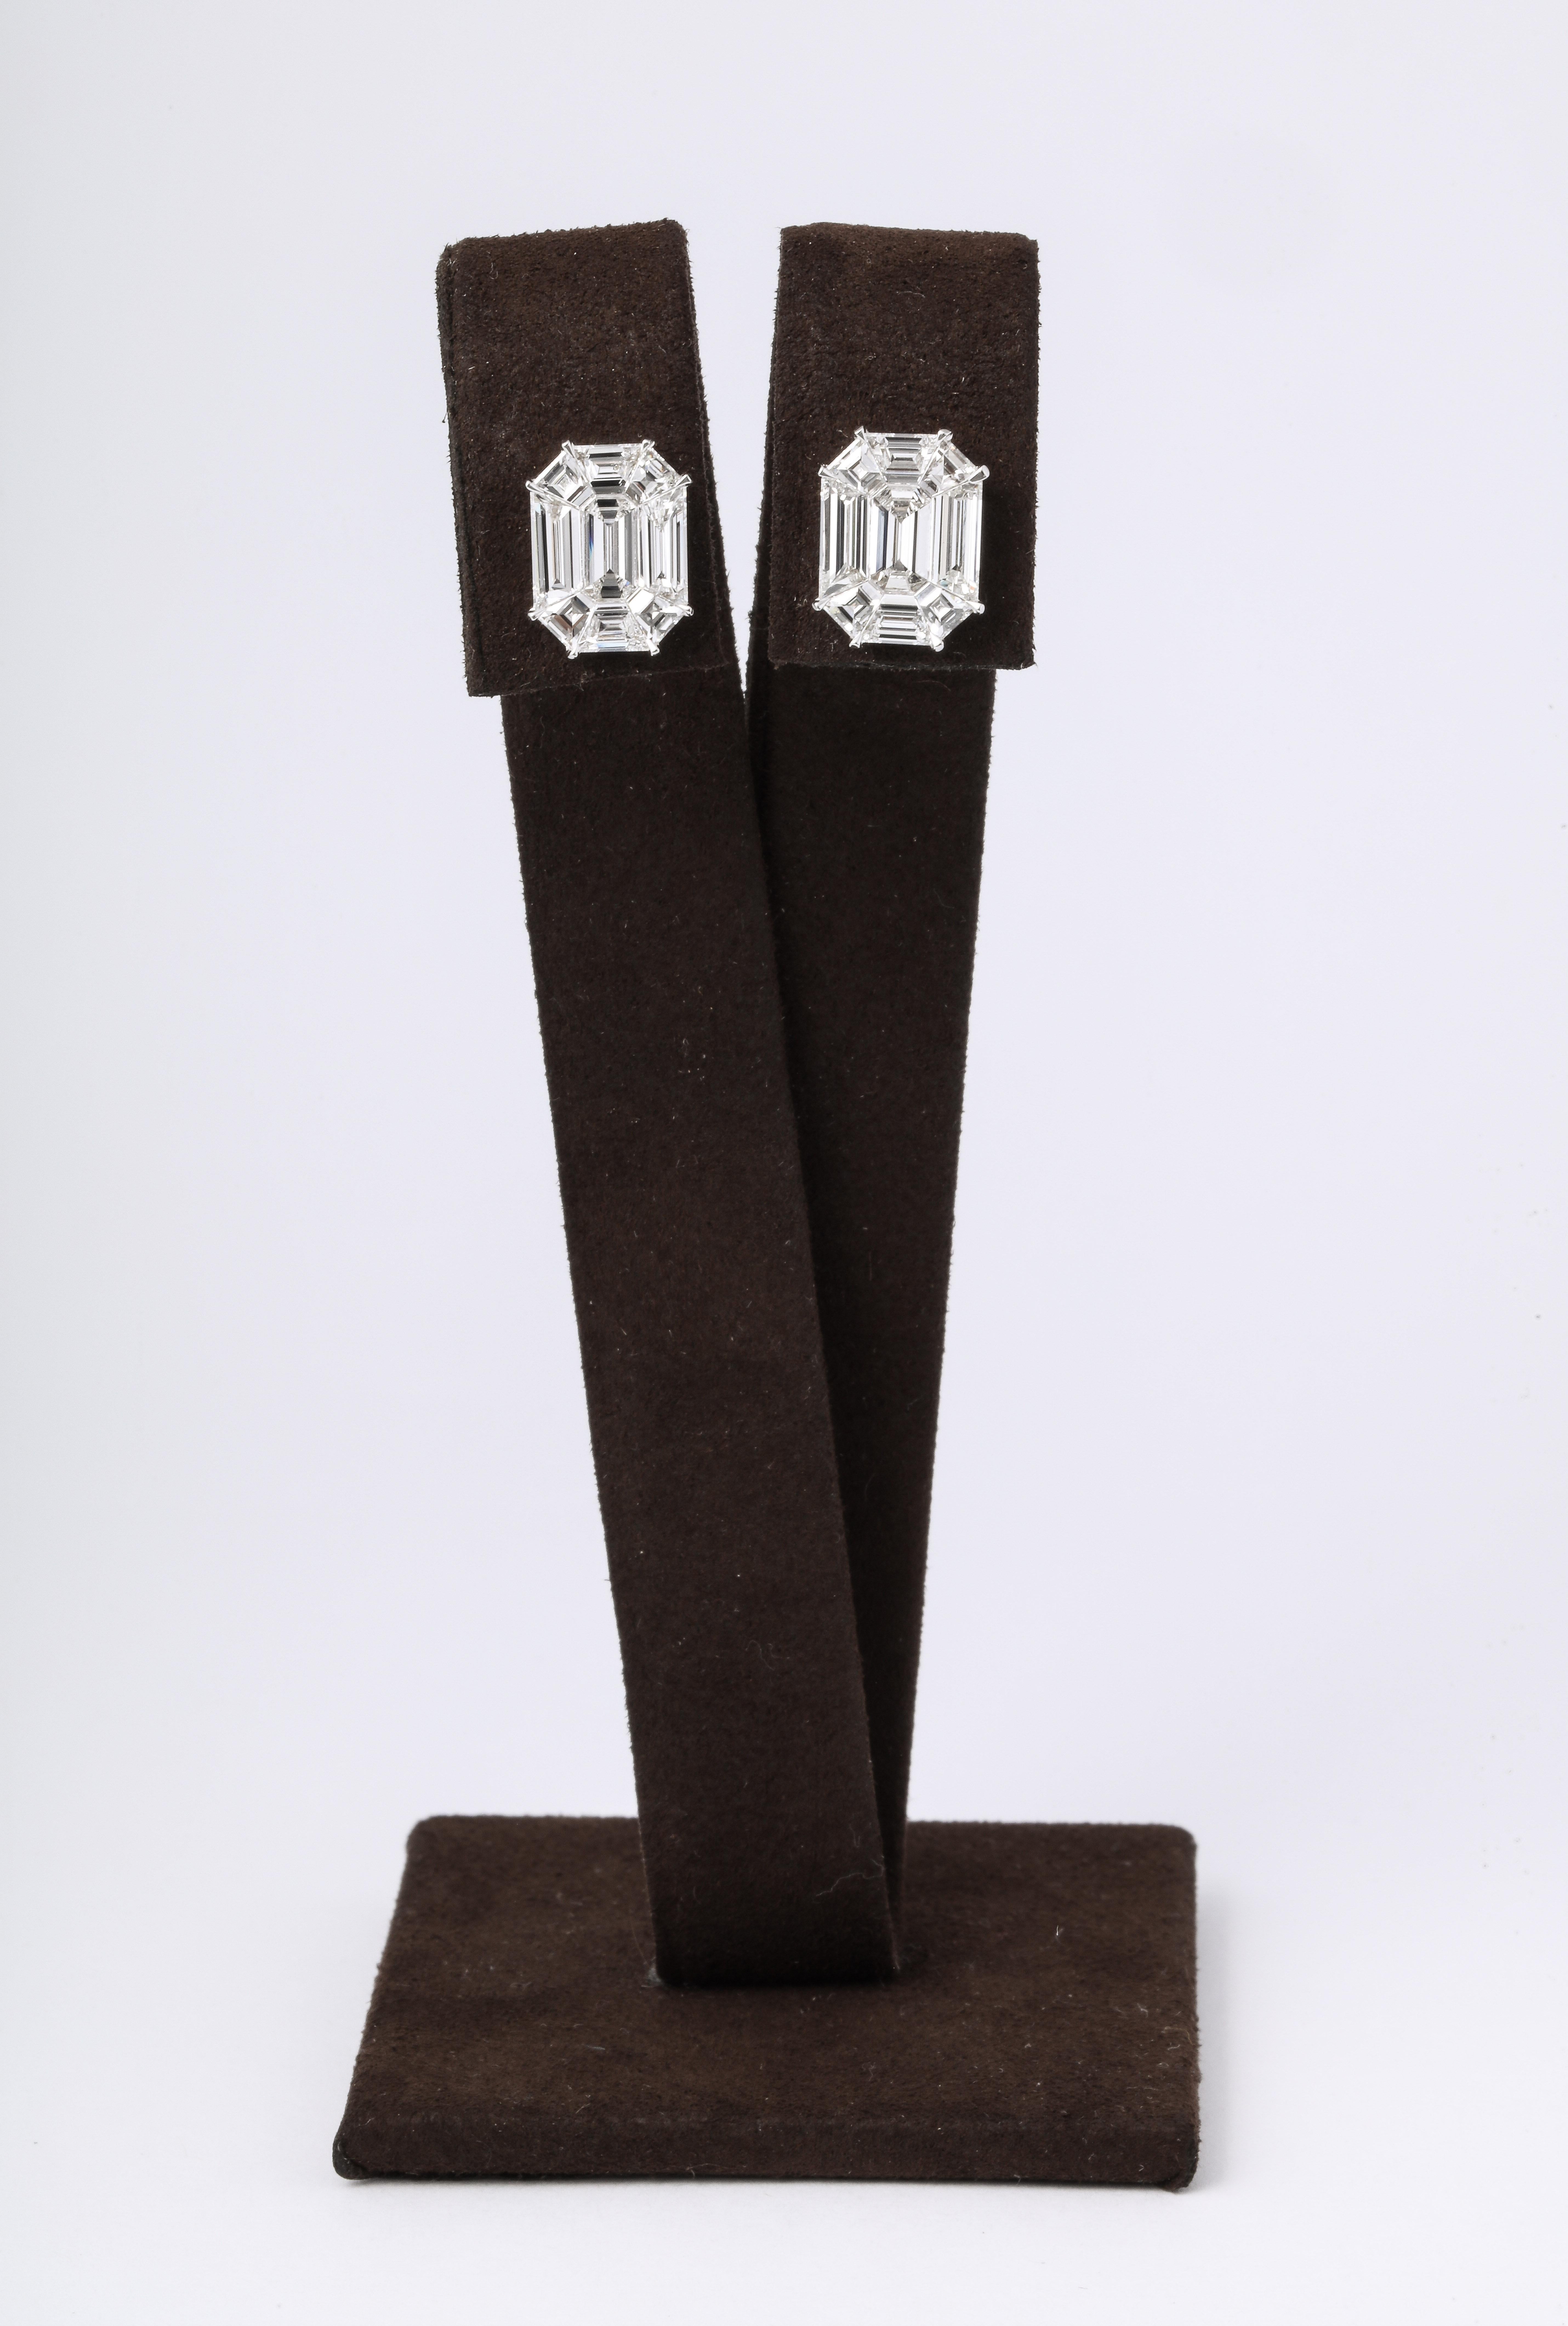 
These earrings give the illusion of 7-8 carat EACH emerald cut studs!

4.35 carats of F VS special cut diamonds, masterly set to look like one emerald cut diamond.

Set in 18k white gold

The earrings measure 12.8 mm x 10 mm approximately. 

A